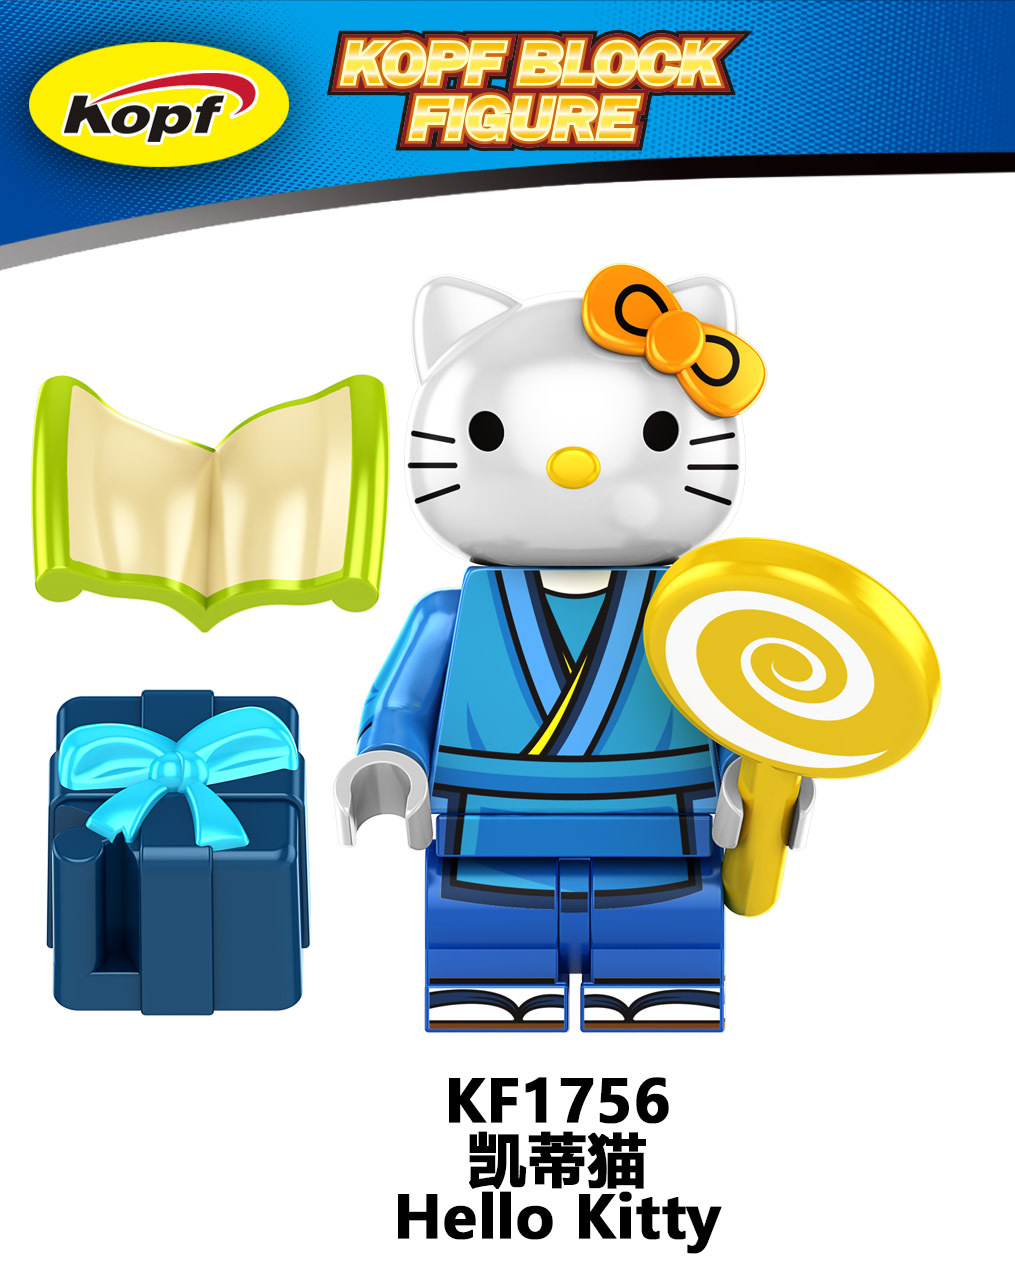 KF6166 KF1752 KF1753 KF1754 KF1755 KF1756 KF1757 KF1758 KF1759 KF1762 Cartoon Series Mini Building Blocks Hello Kitty Buzz Lightyear Zach The Great Demon Action Figures Educational Toys For Kids Gifts